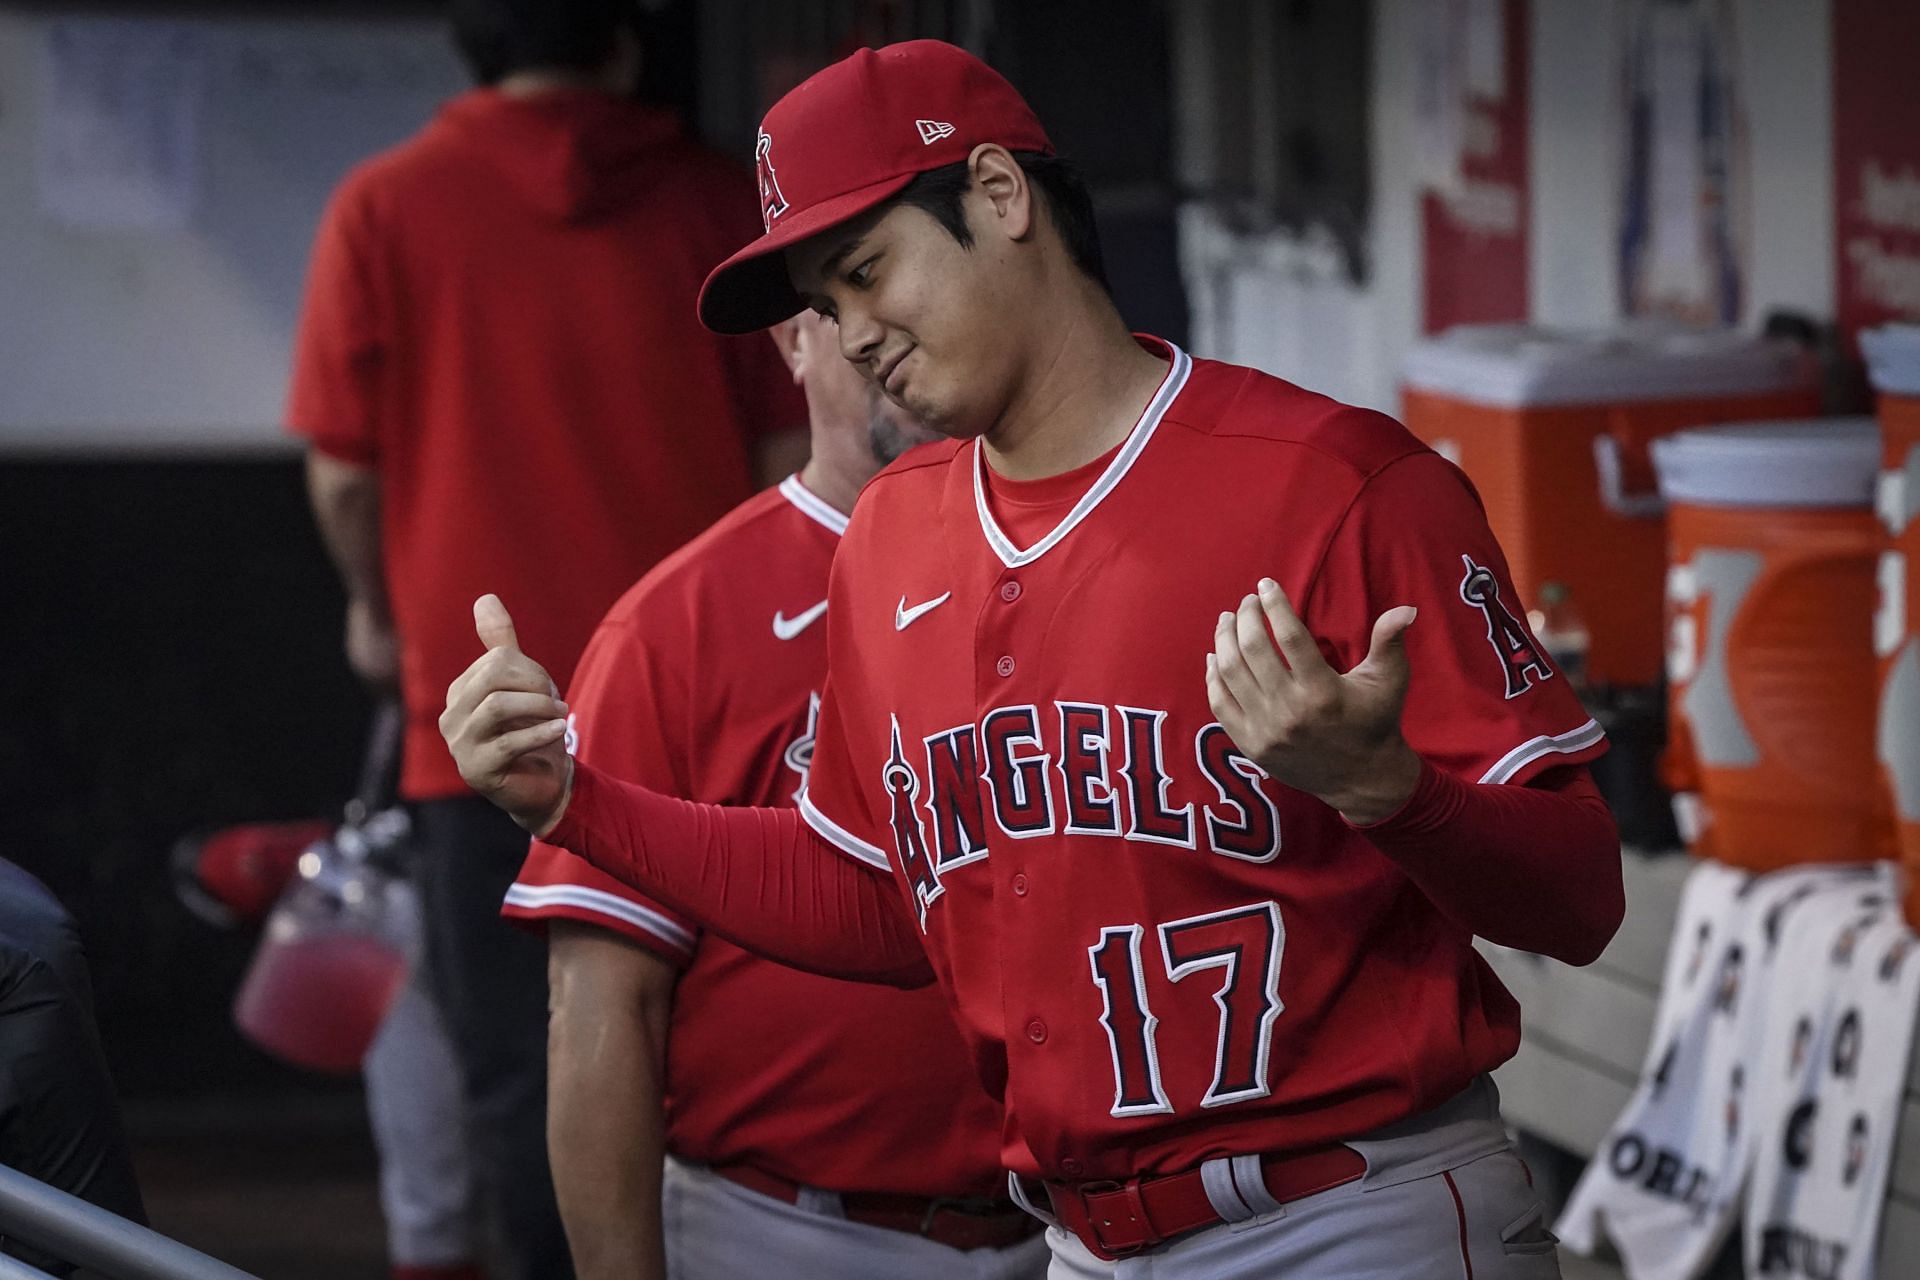 Los Angeles Angels designated hitter Shohei Ohtani arrives in the dugout before the start of a baseball game against the New York Mets